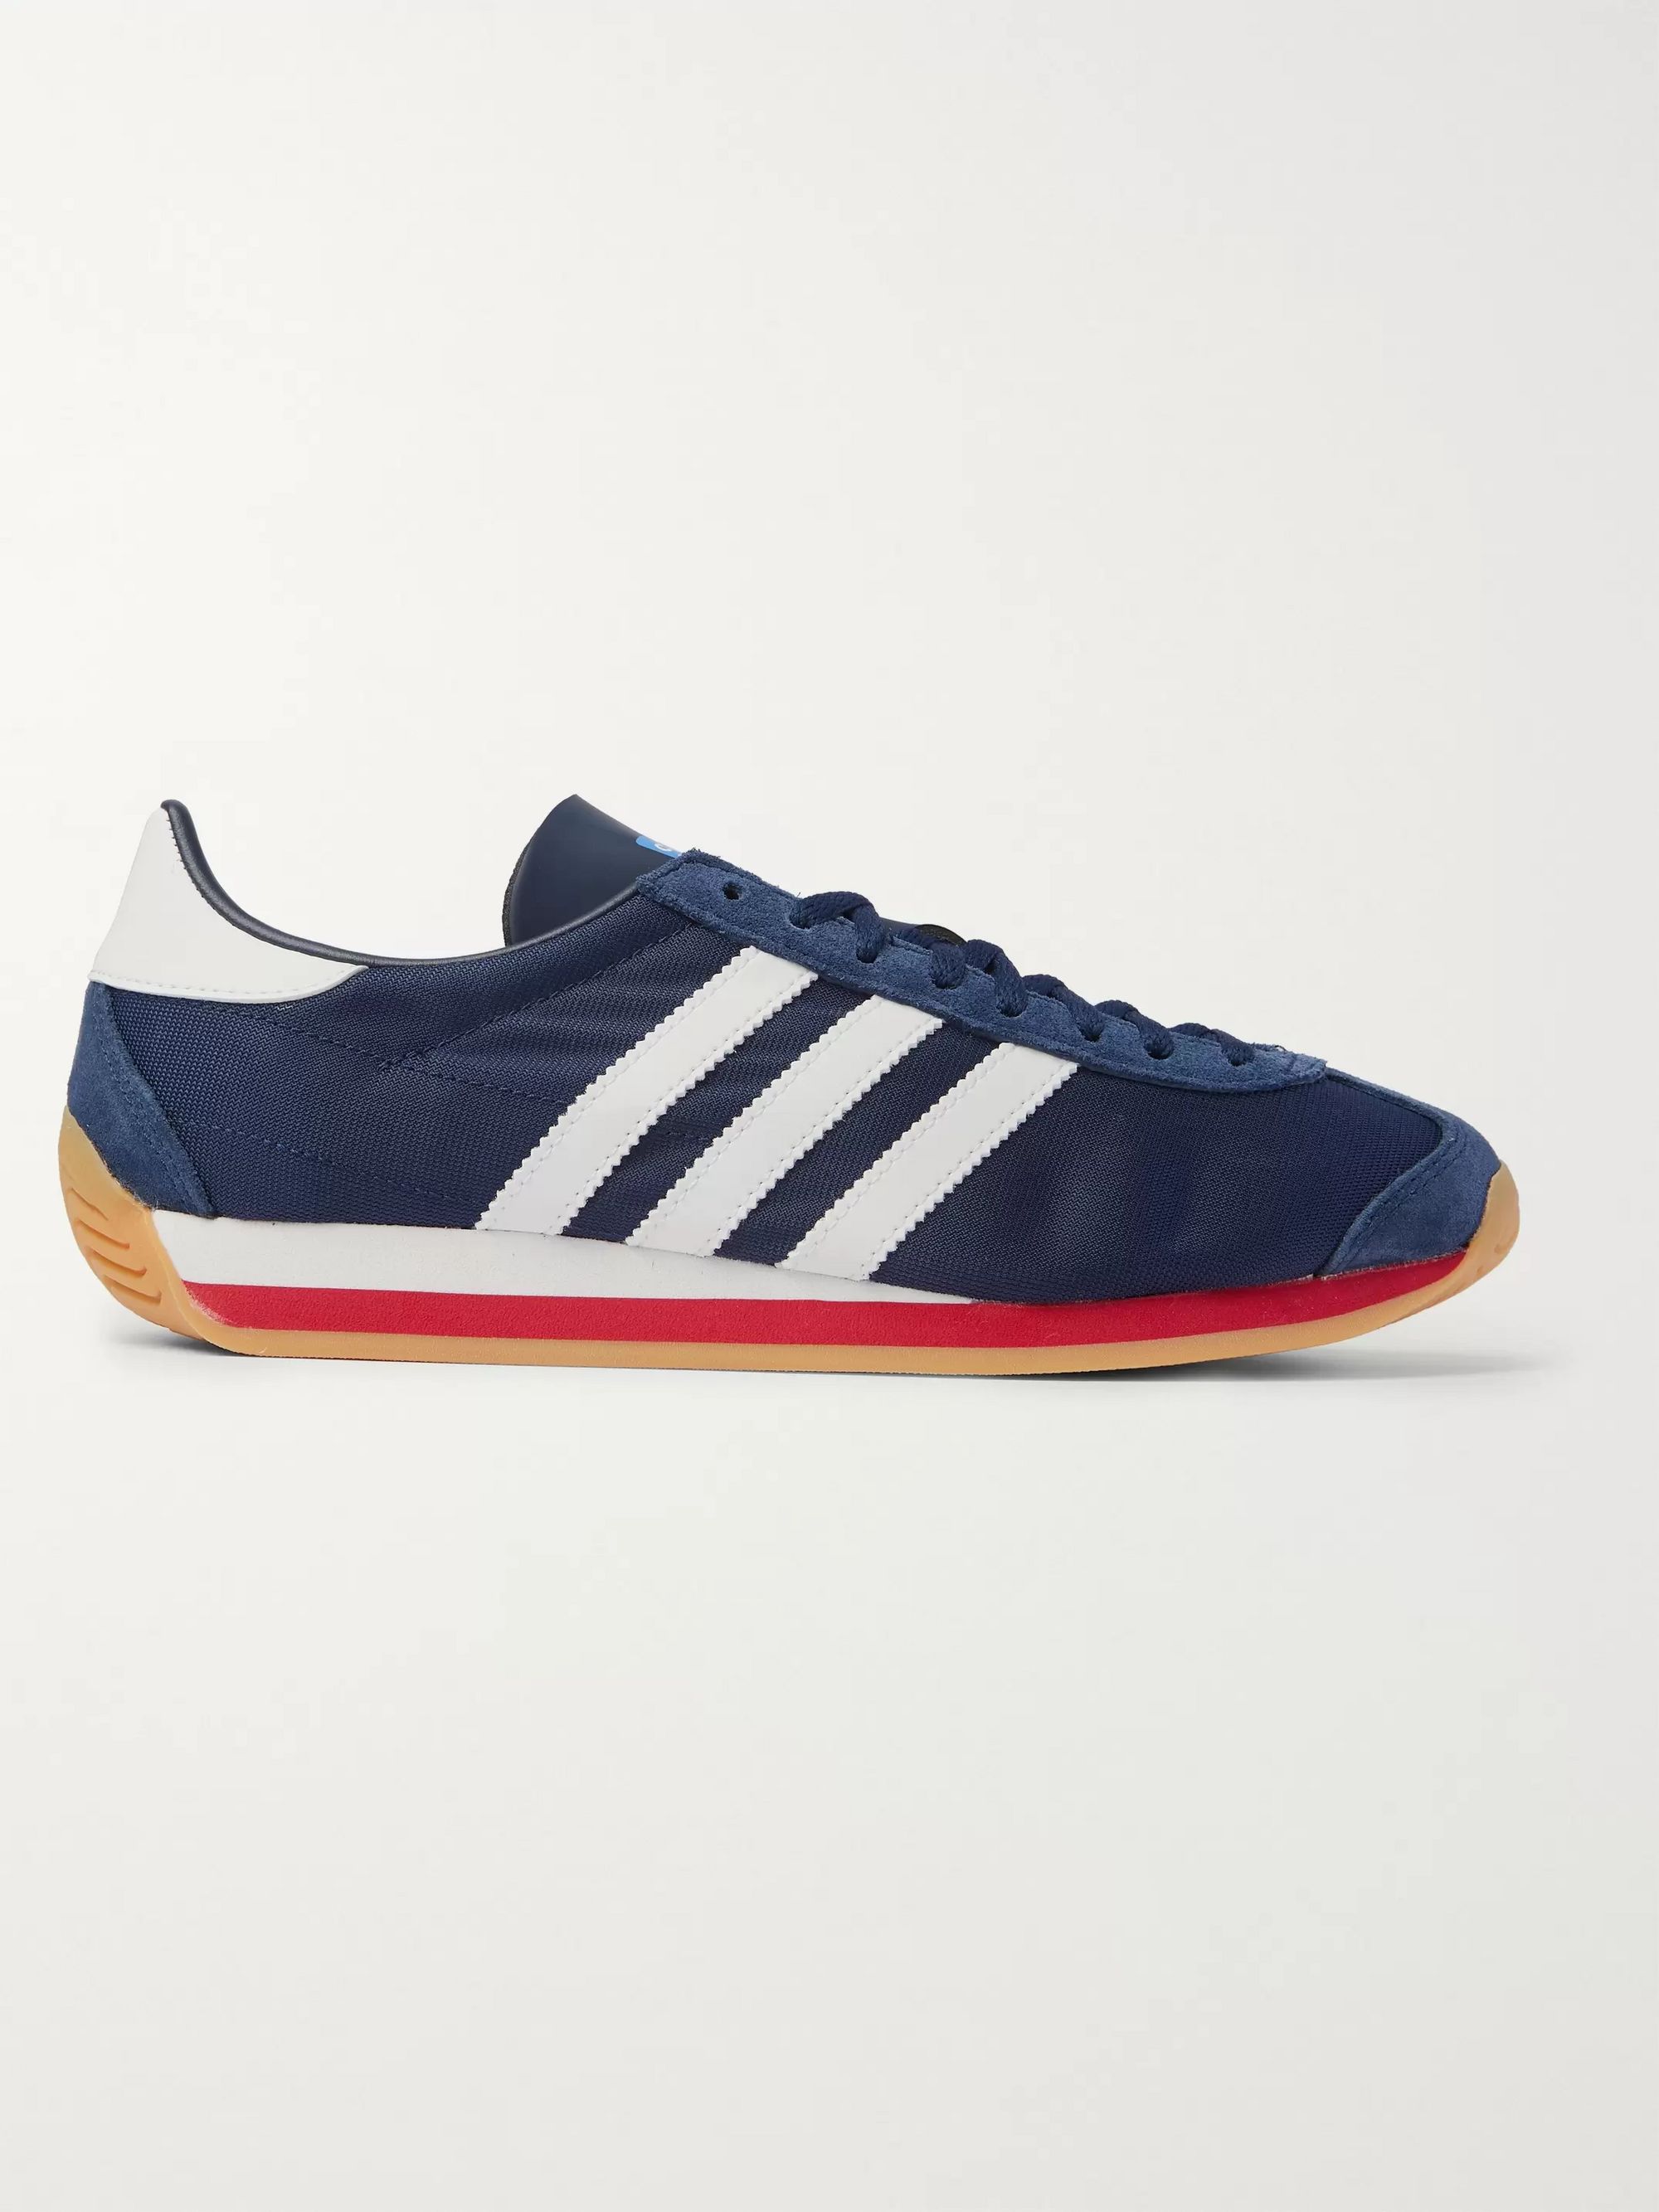 adidas country 2 blue